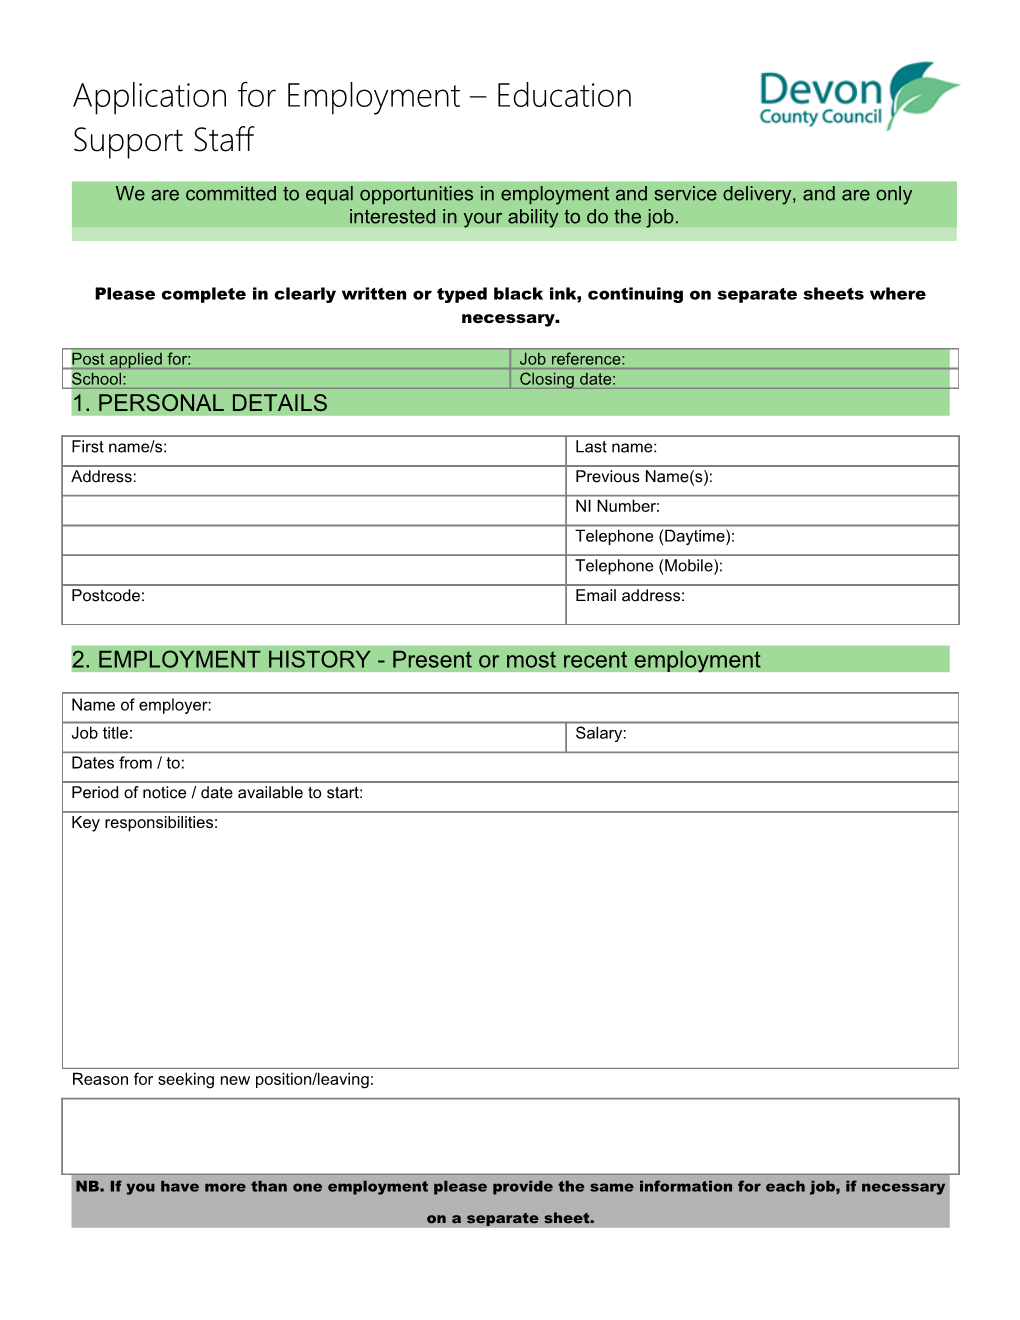 Application Form - Support Staff